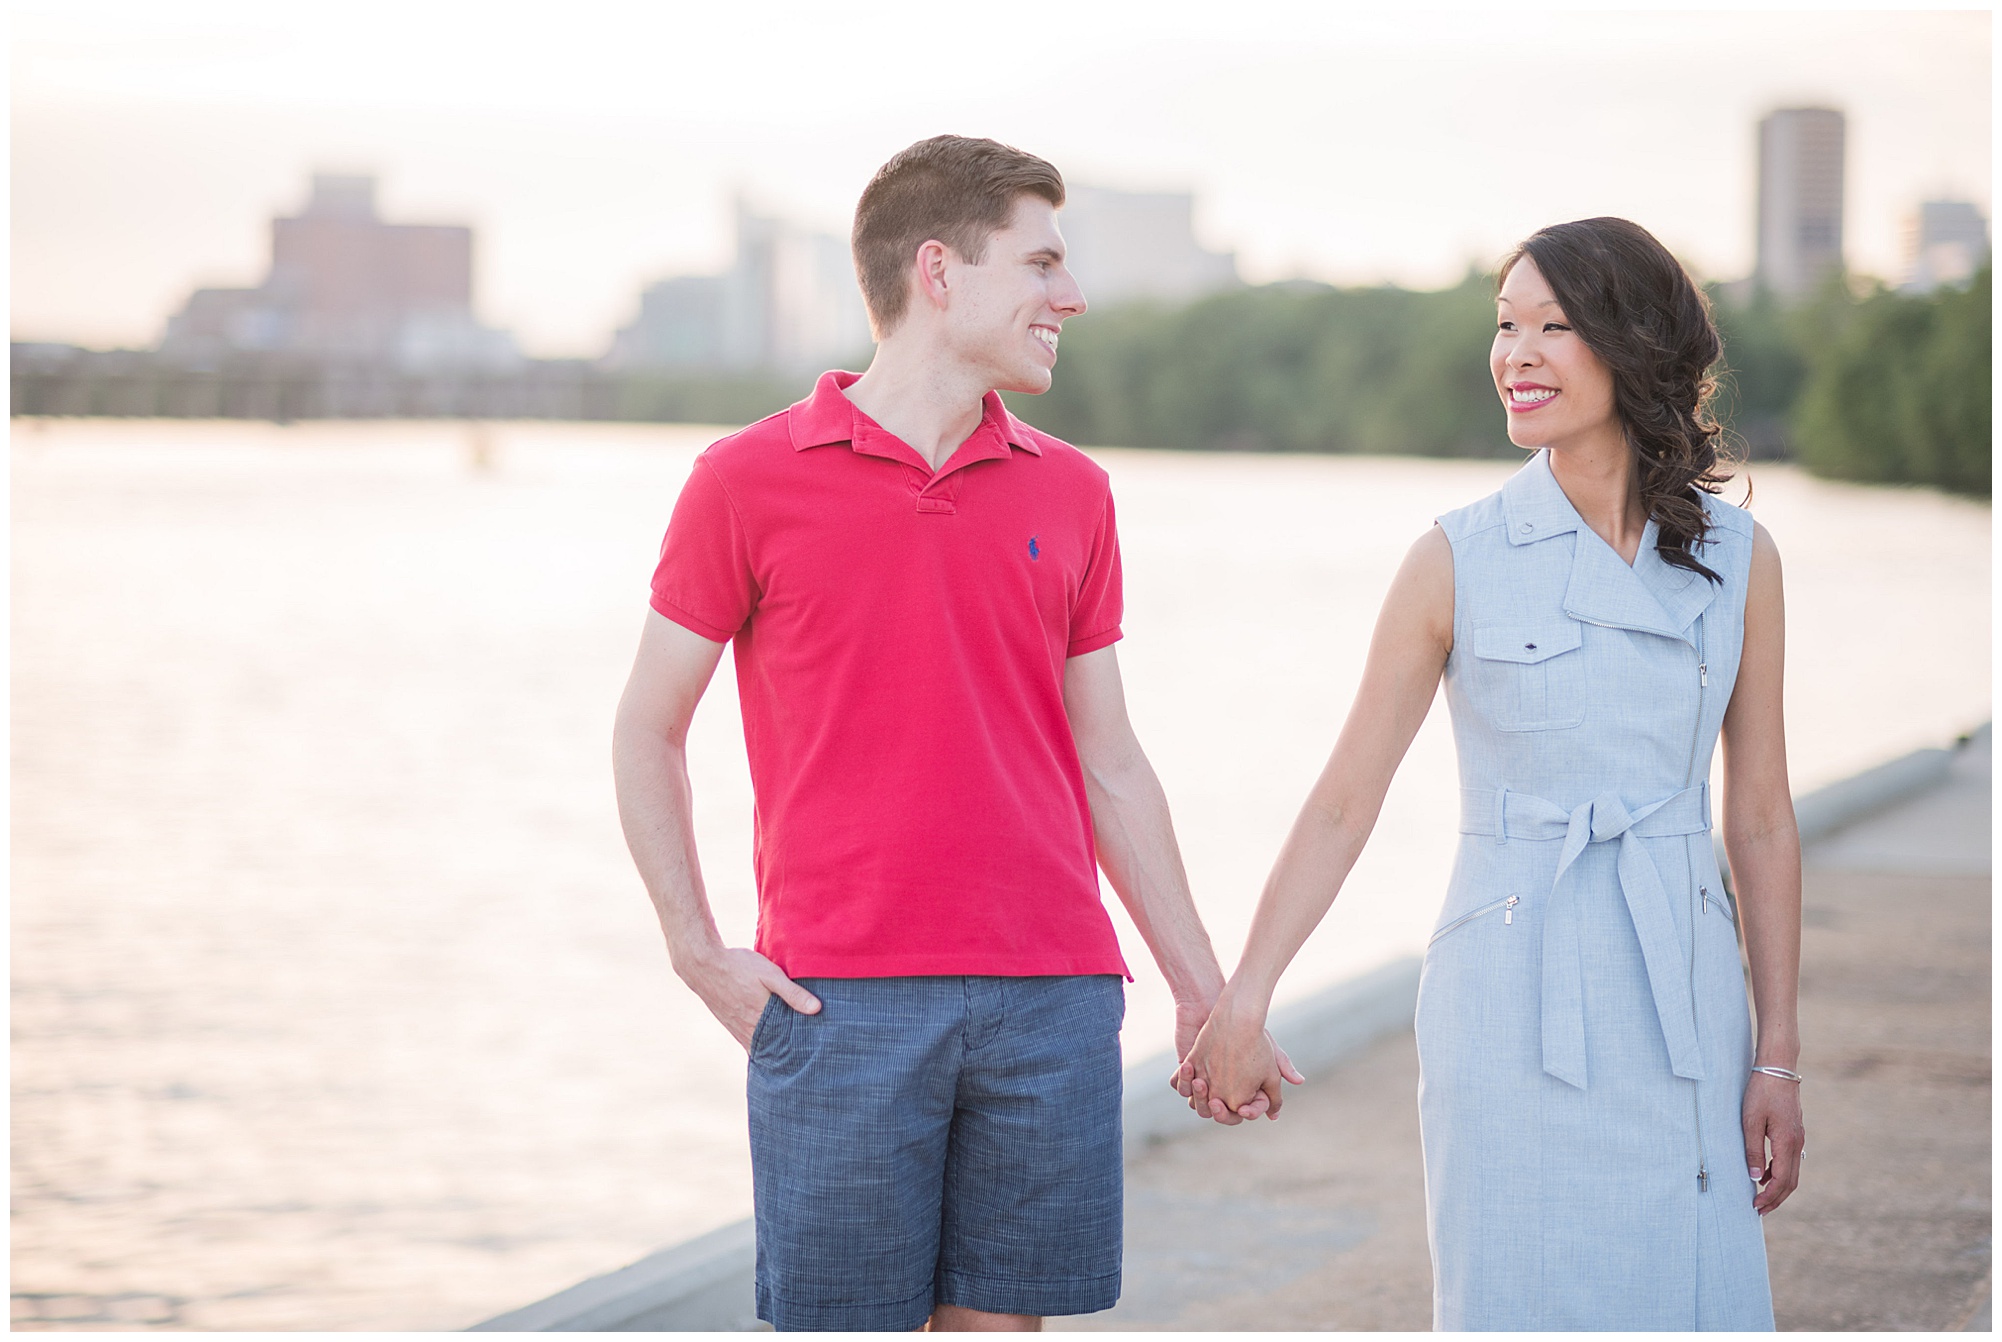 Rocketts Landing Engagement Photos - photo inspiration and ideas - outdoor - just engaged - in the spring summer - james river - virginia - with Stacie and Austin By Richmond RVA Wedding Photographer, Sarah & Dave Photography